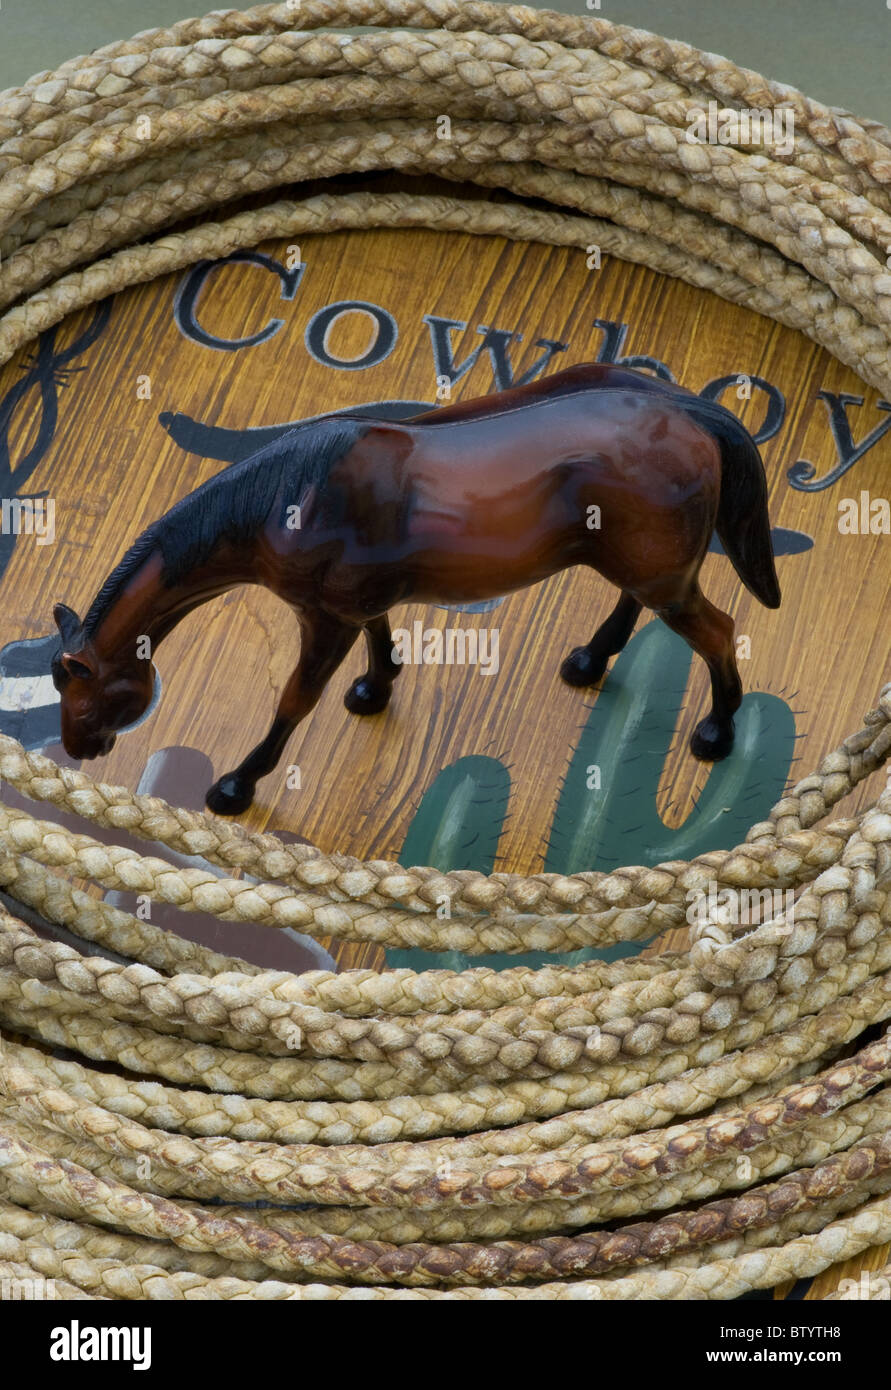 Cowboy sign showing leather lariat rope and toy horse grazing by cactus Stock Photo